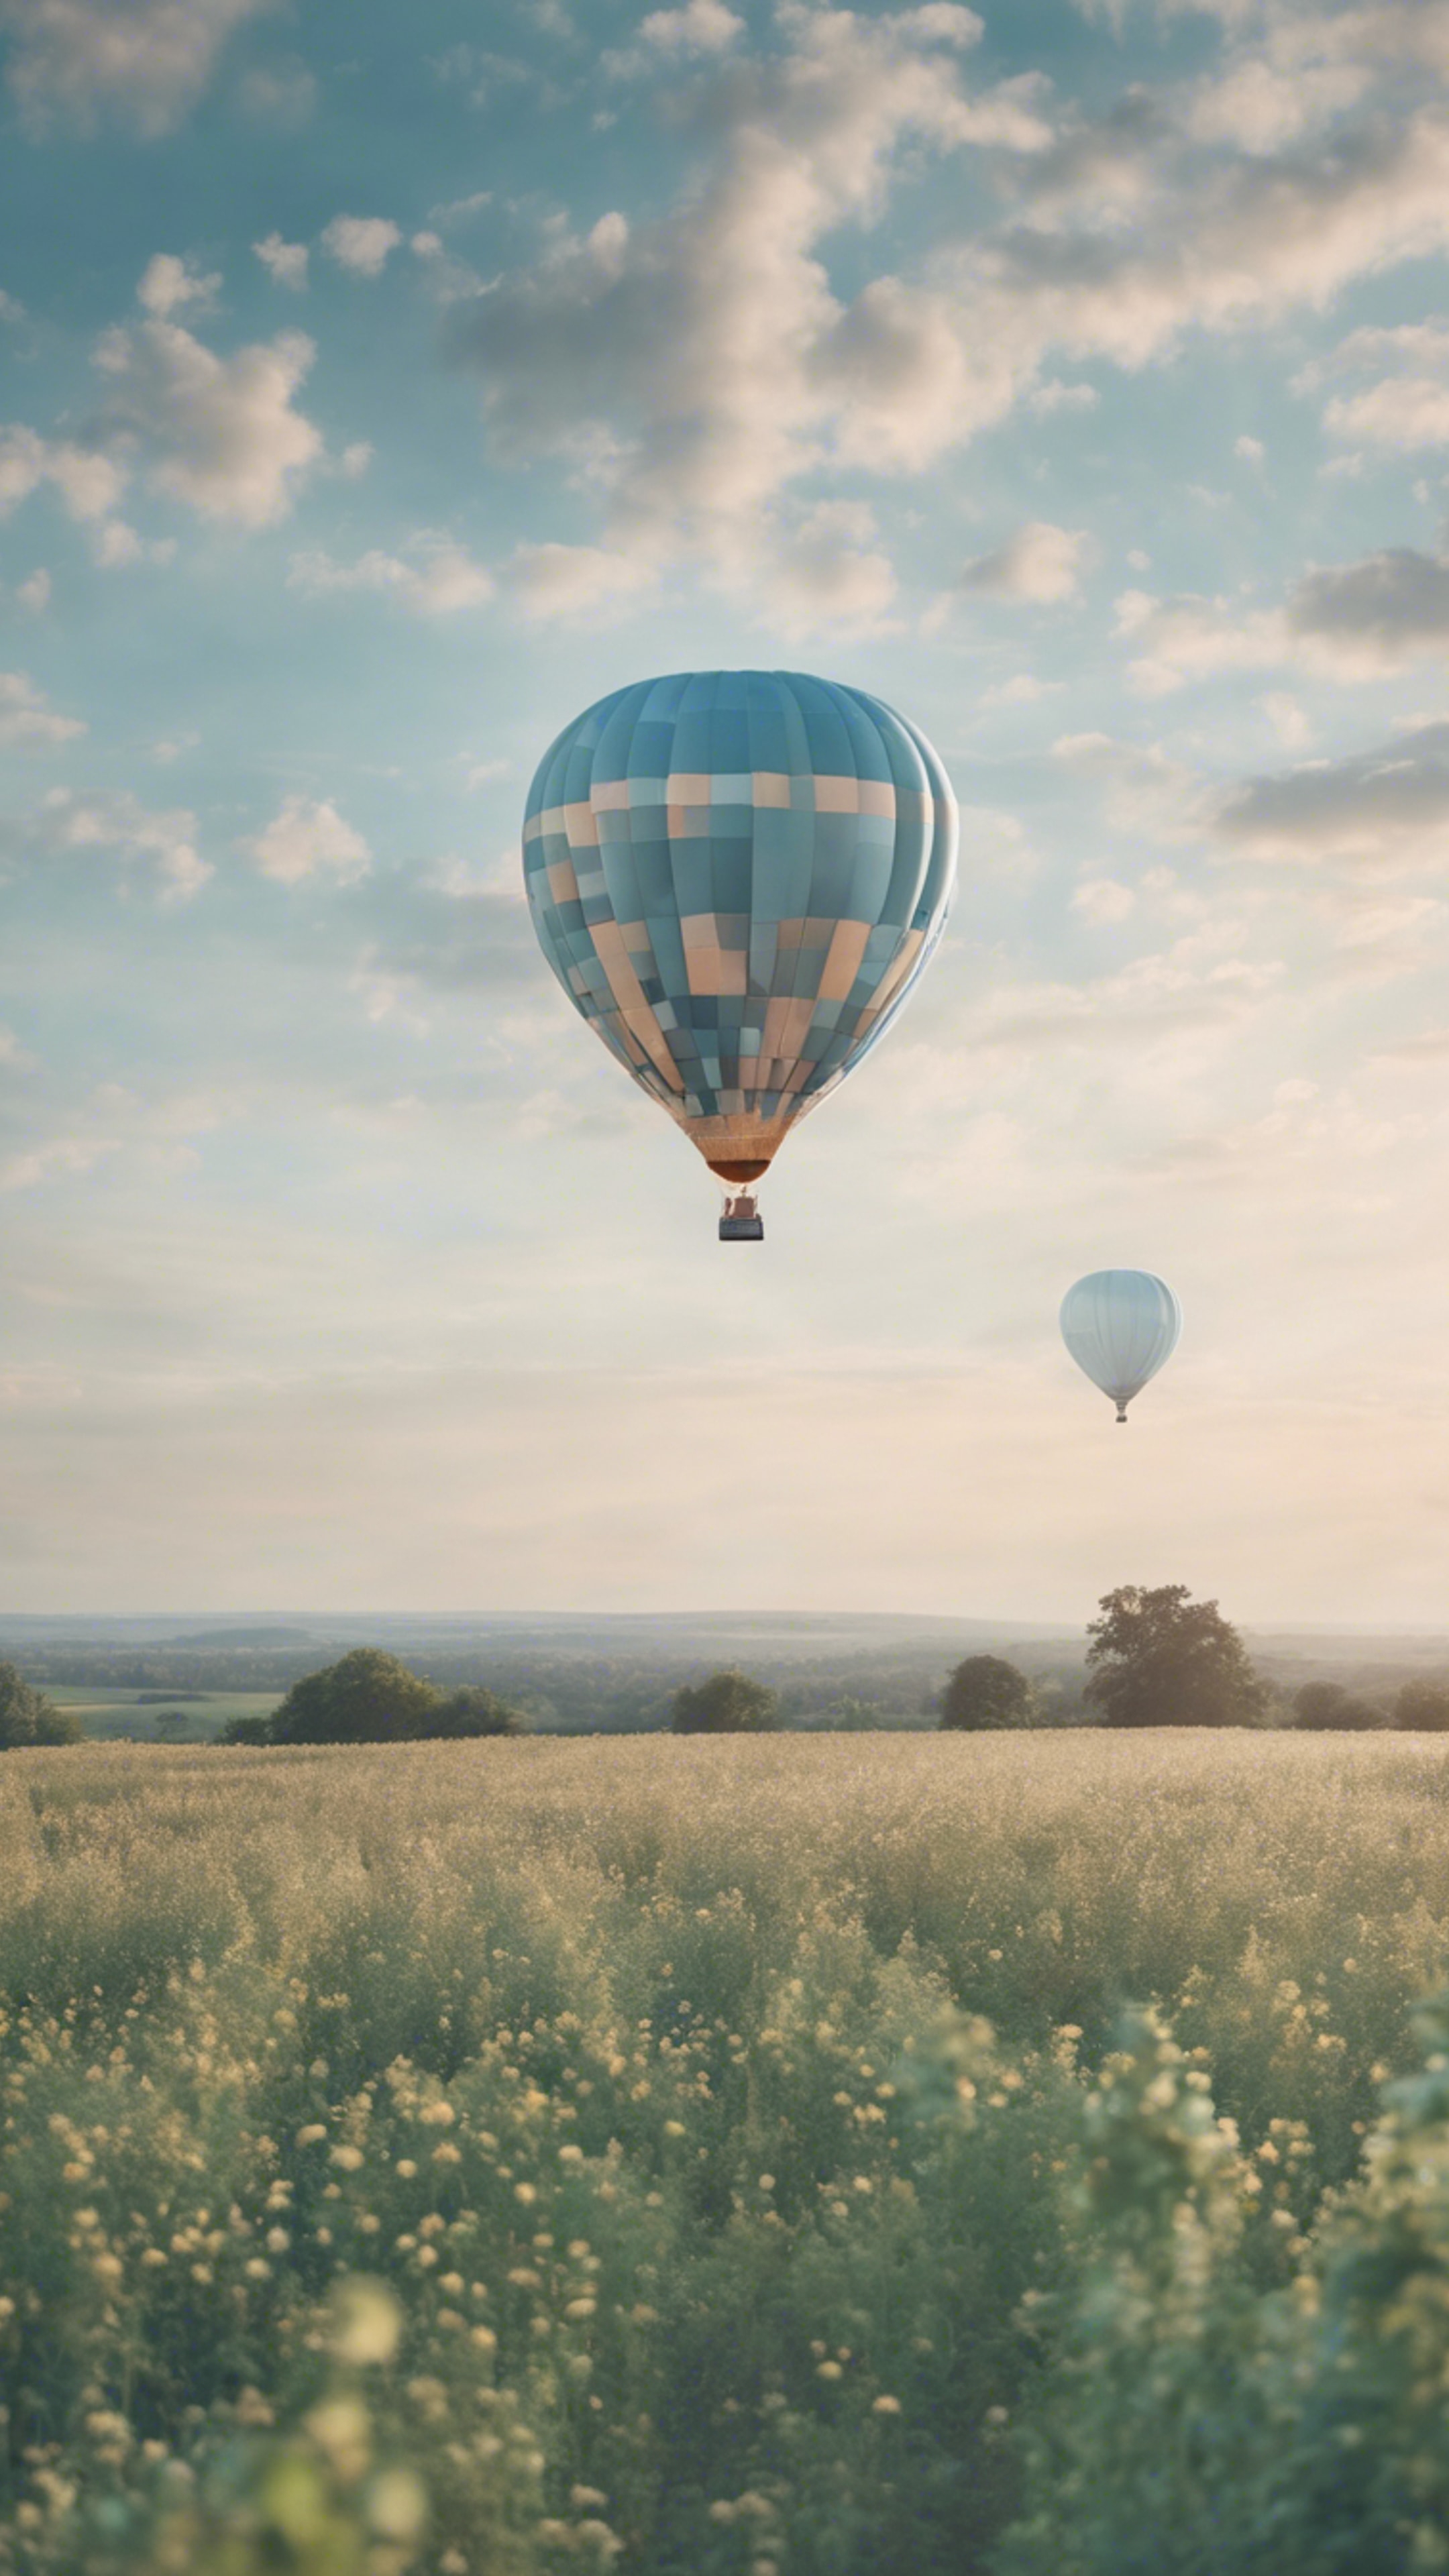 A pastel blue hot air balloon floating serenely above a patchwork field.壁紙[b19c340976c044f4b3c6]